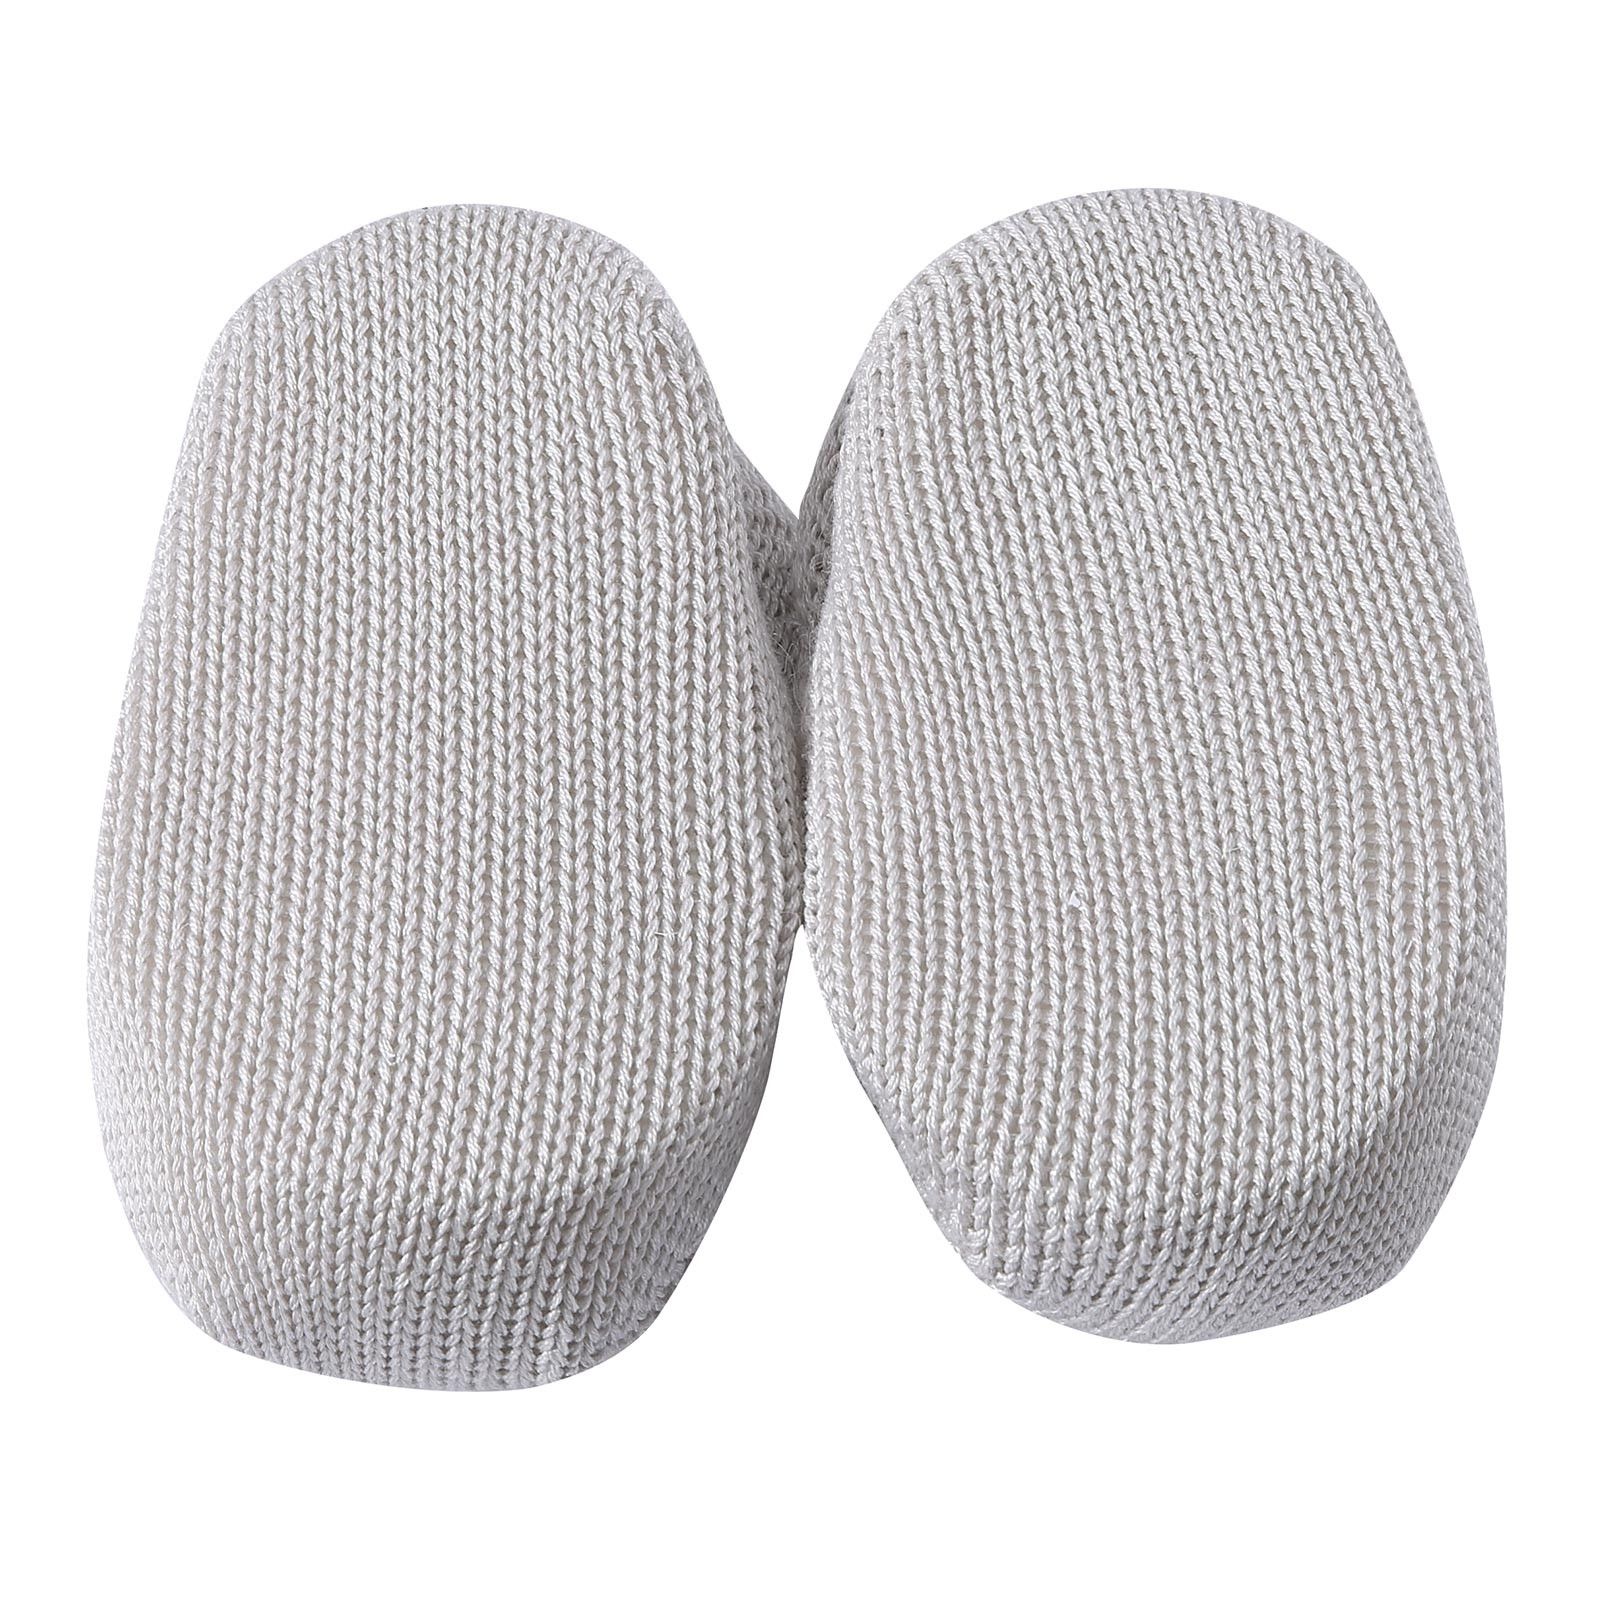 Baby Grey Knitted Cotton Shoes - CÉMAROSE | Children's Fashion Store - 4